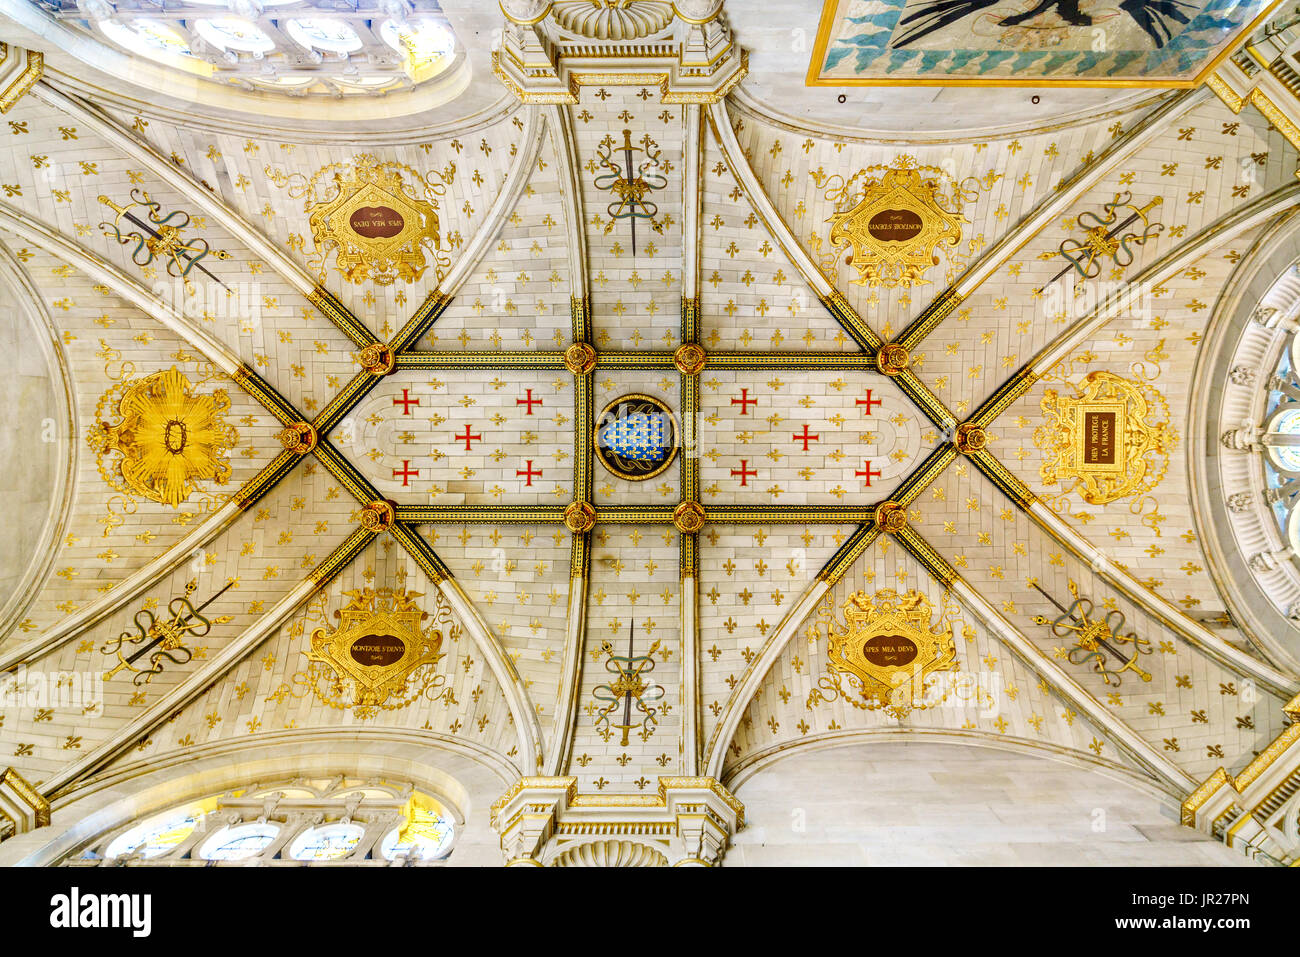 Ceiling of the Chapel of the Hearts of the Princes, Château de Chantilly, Chantilly, France Stock Photo